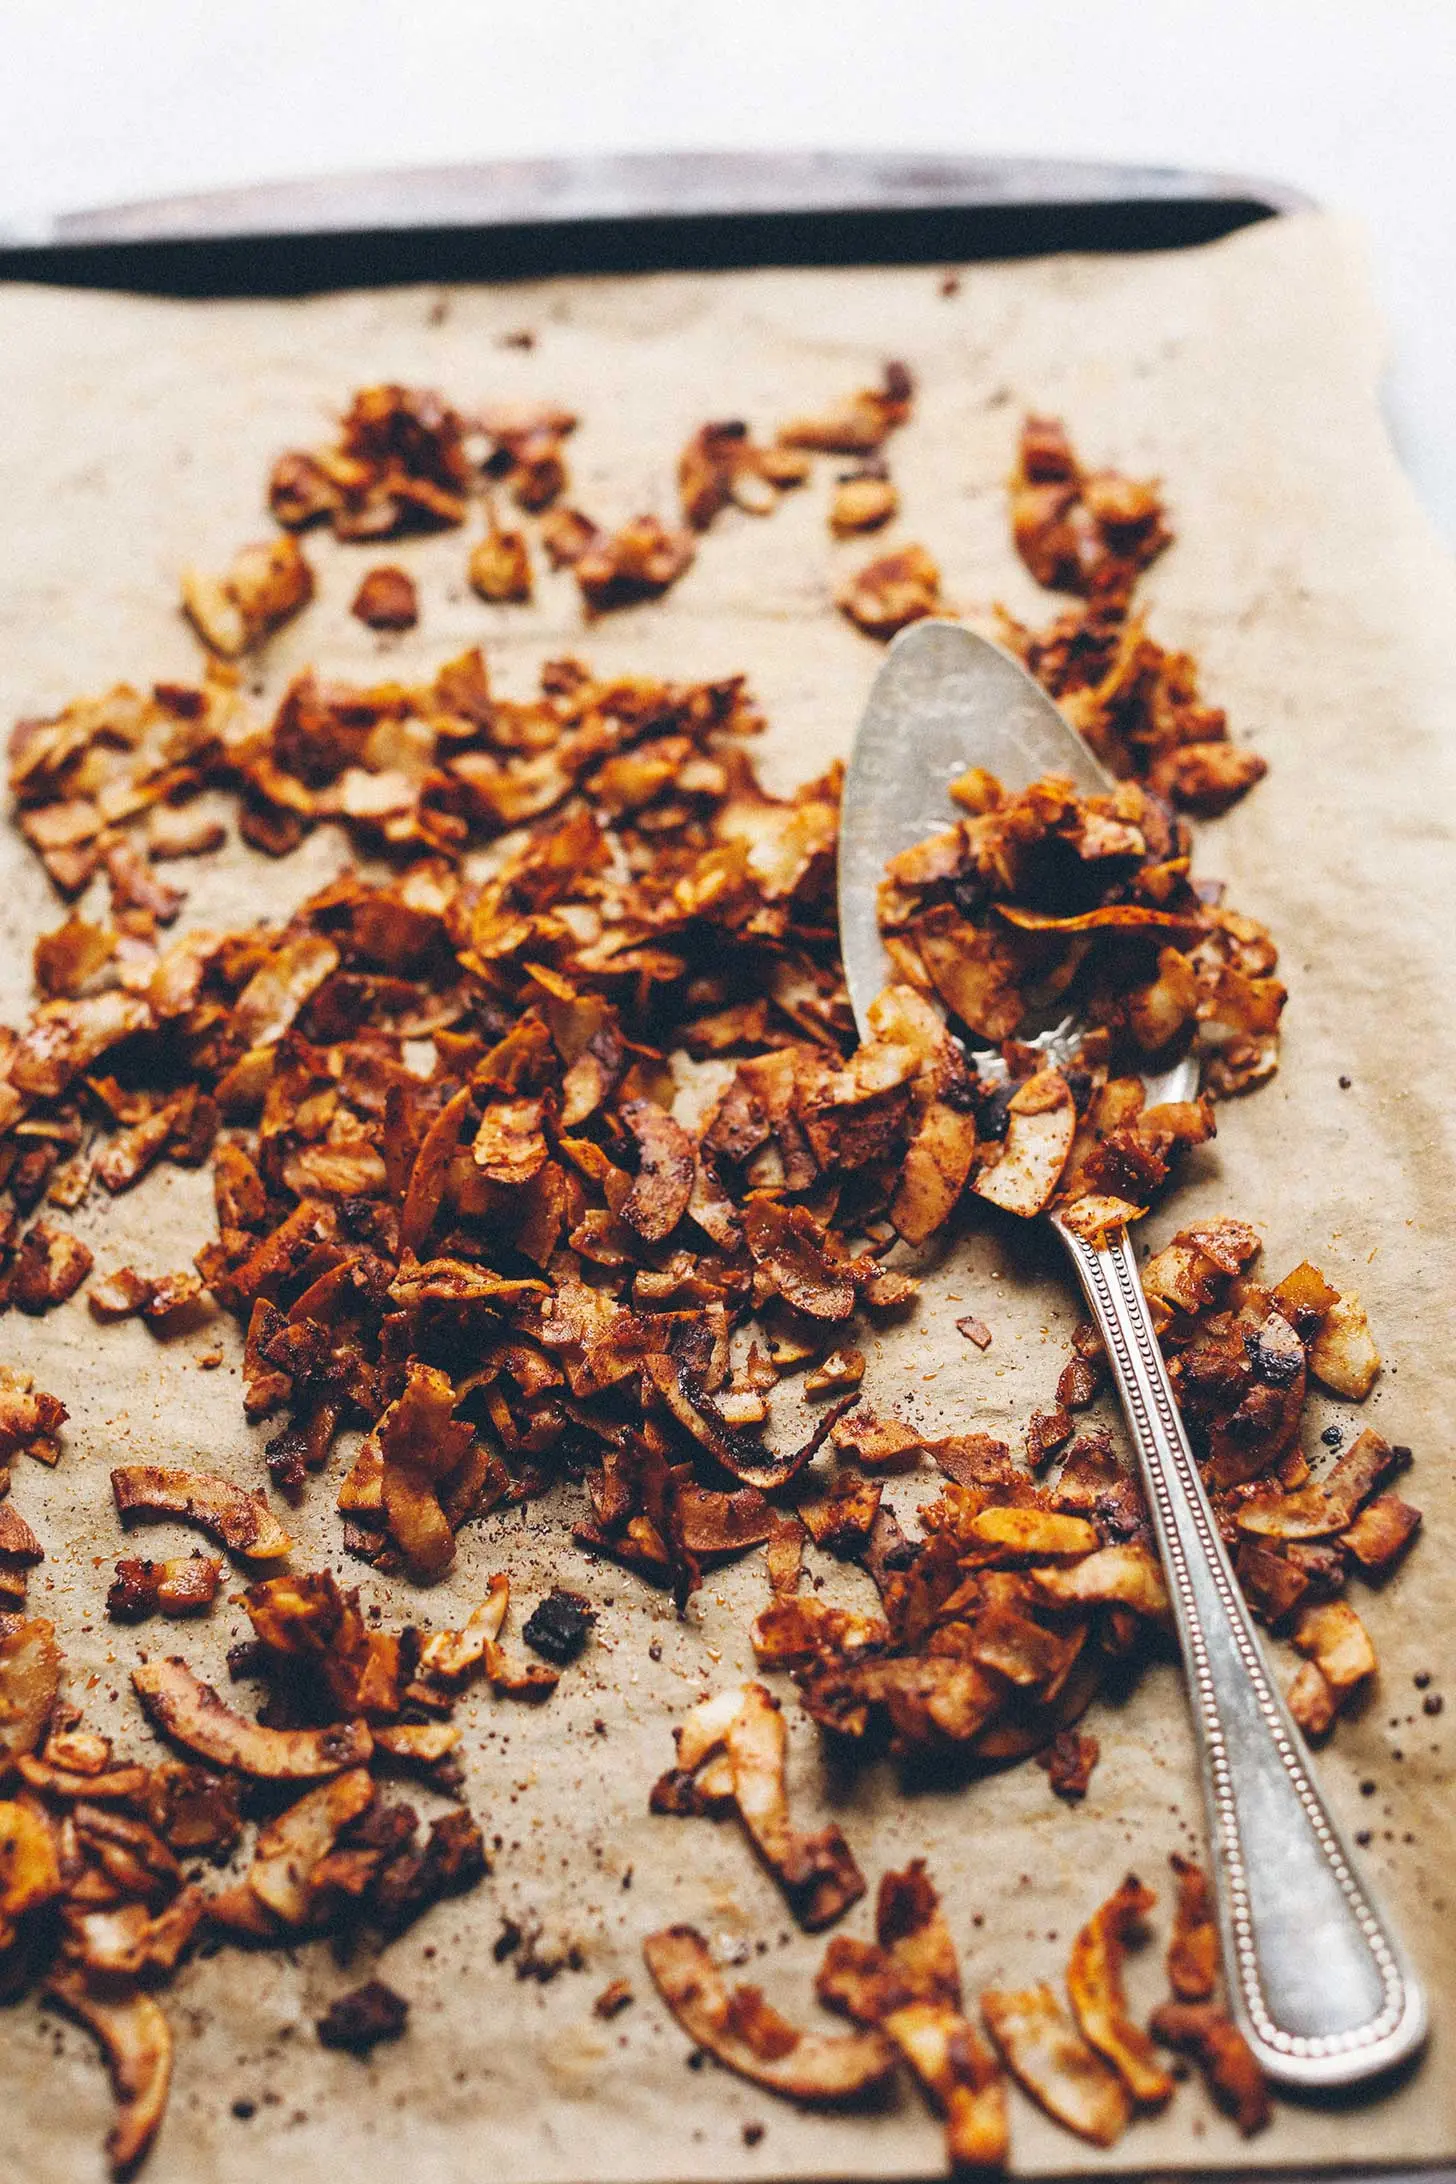 smoked coconut bacon - How many calories are in coconut bacon